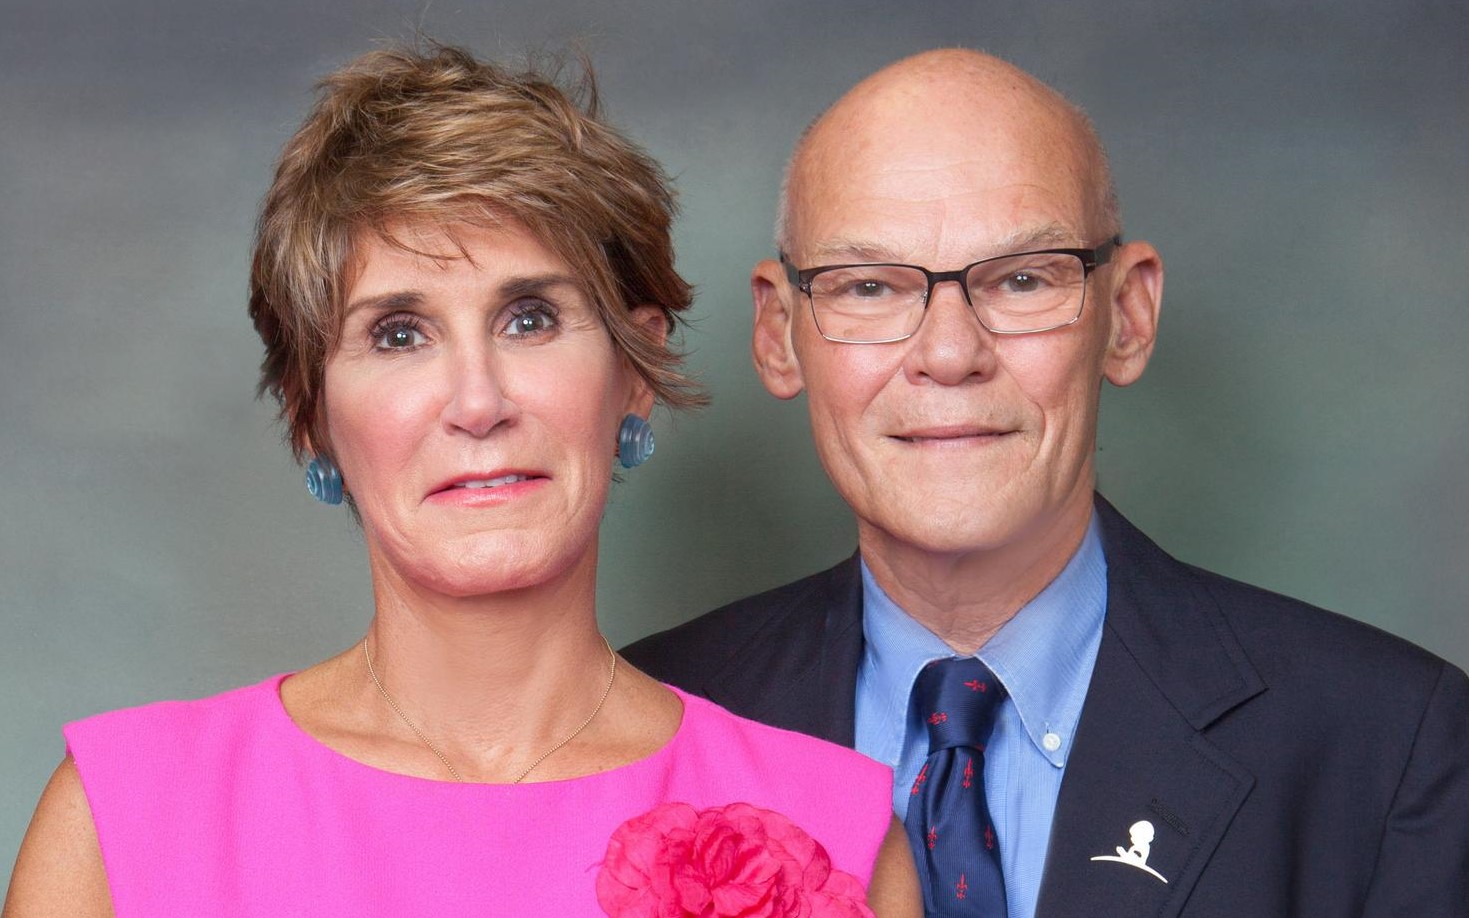 Matalin and Carville